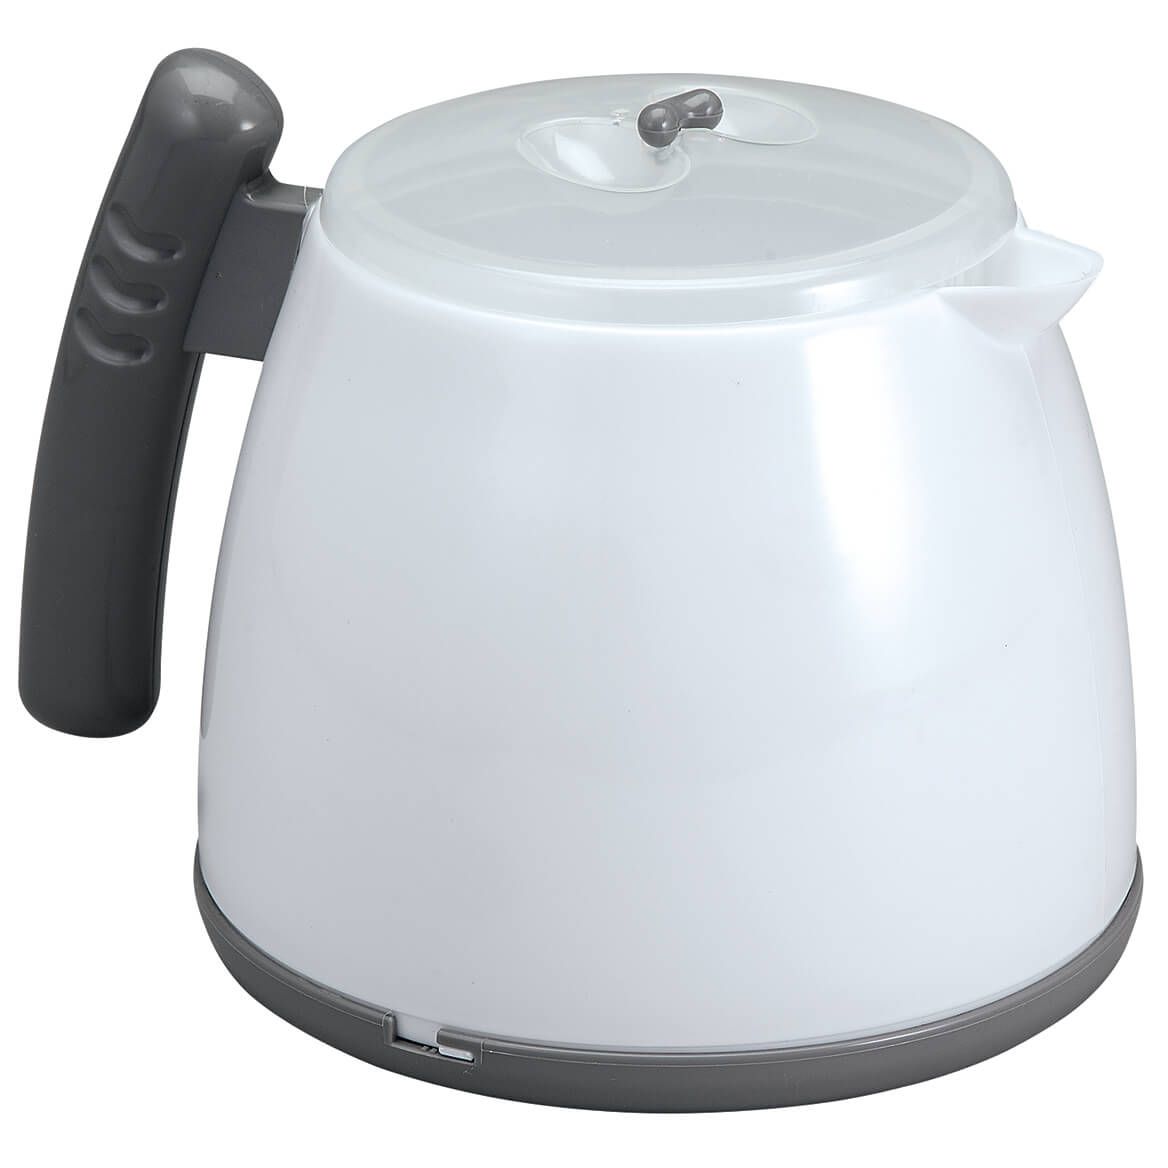 Microwave Tea Kettle by Home Marketplace + '-' + 371631